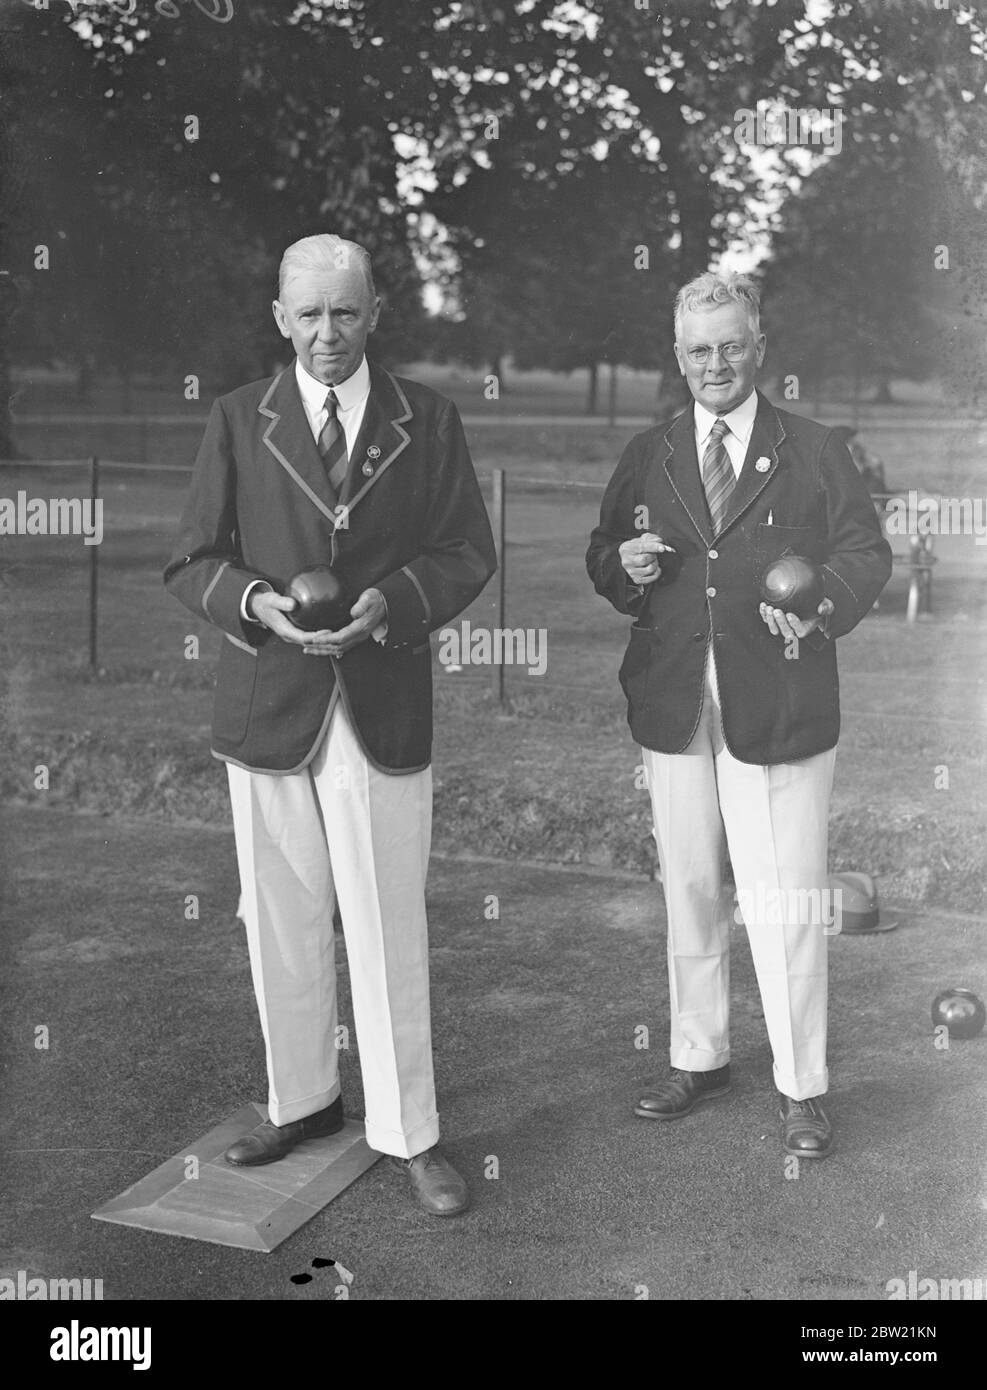 Sir henry Barwell (left) the Australian captian, and Mr W.H Evans both of the Adelaide Oval Bowling Club at the Royal household Bowling club of Windsor Castle, membership of which is confined to persons in the Royal services. They played a match against the Australian team in the grounds of Windsor Castle. During their visit members of the Australian team had tea at the castle and were shown around the state apartments. 5 September 1937. Stock Photo